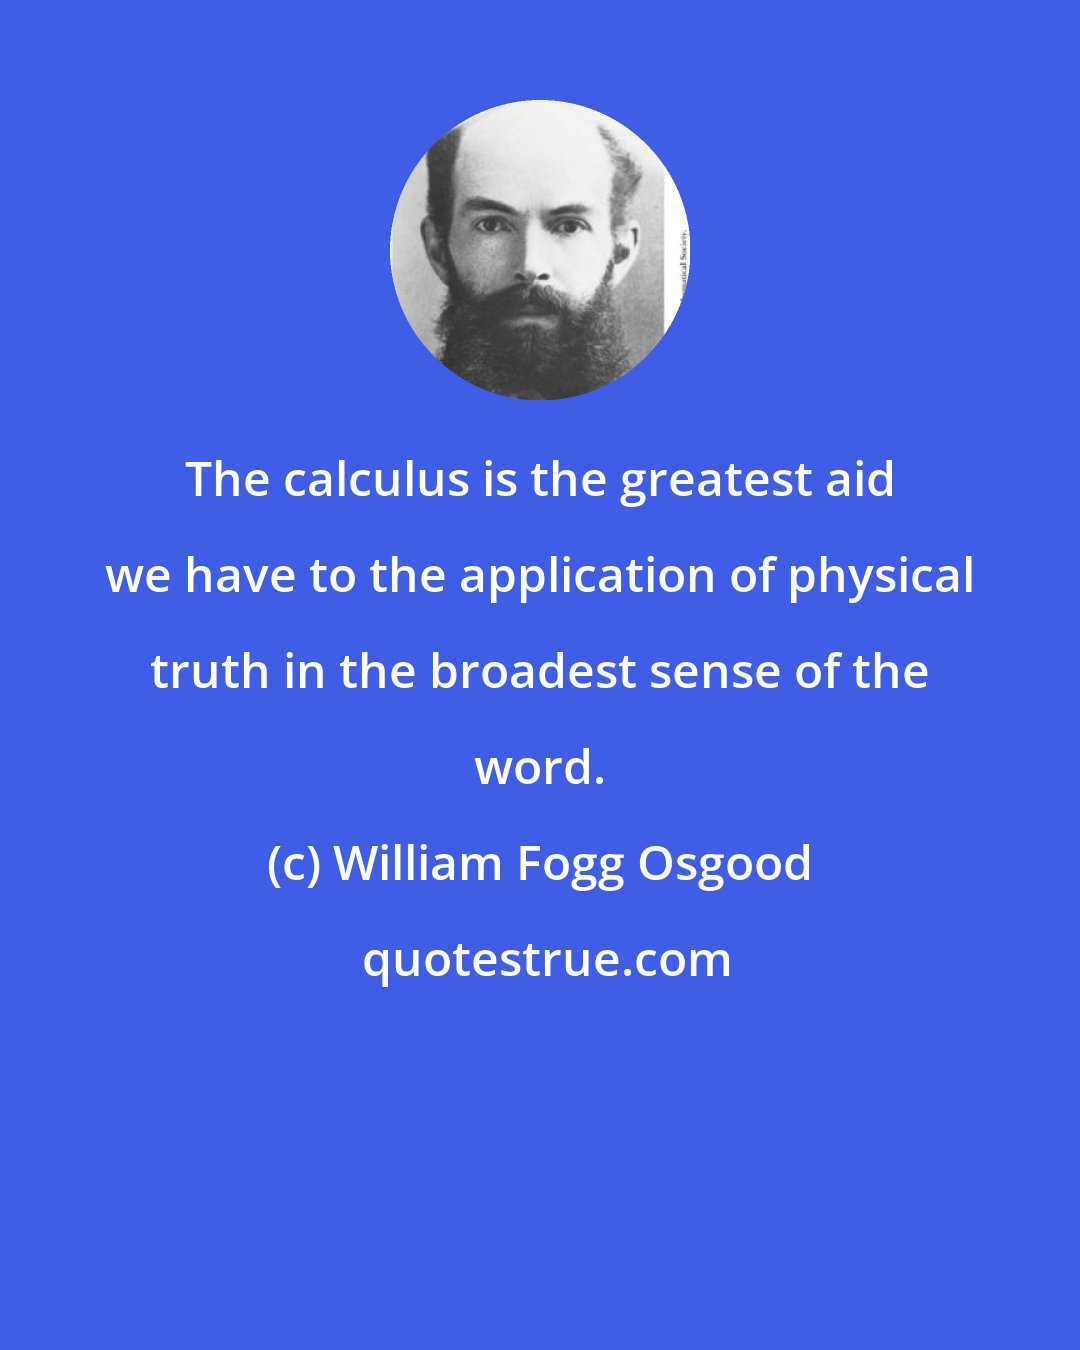 William Fogg Osgood: The calculus is the greatest aid we have to the application of physical truth in the broadest sense of the word.